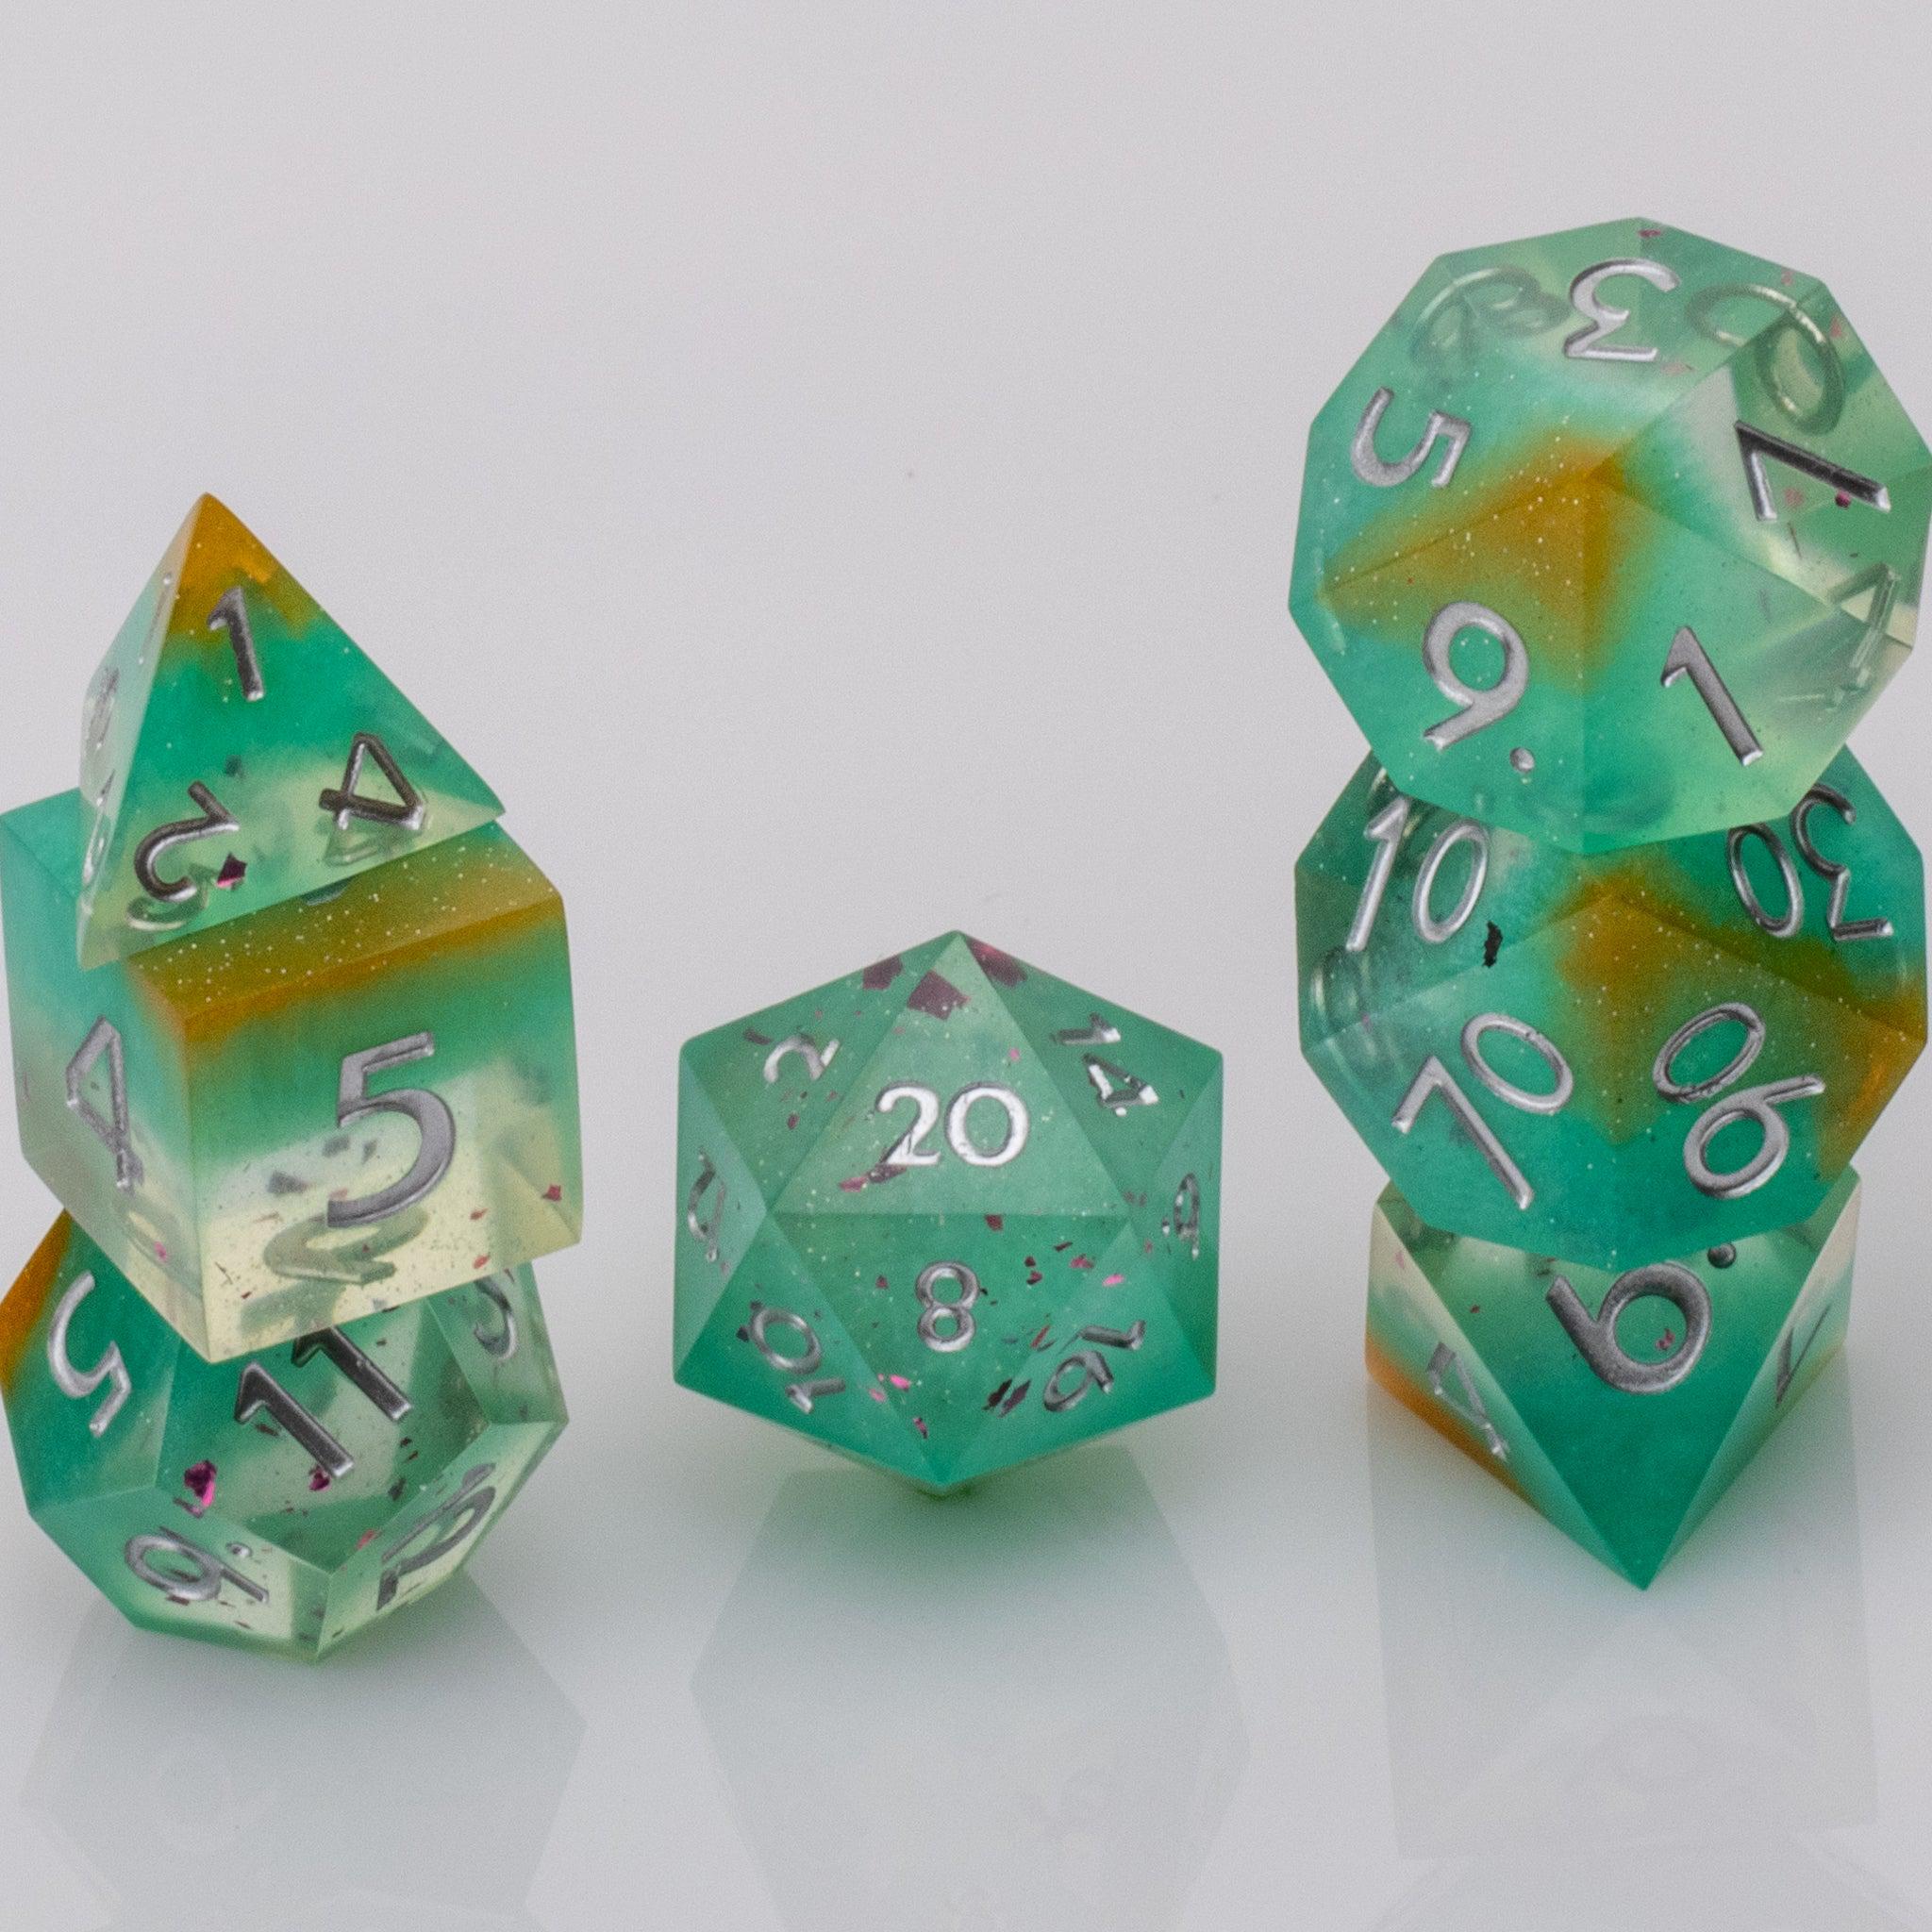 Mojito, green handmade resin DND dice set on white background.